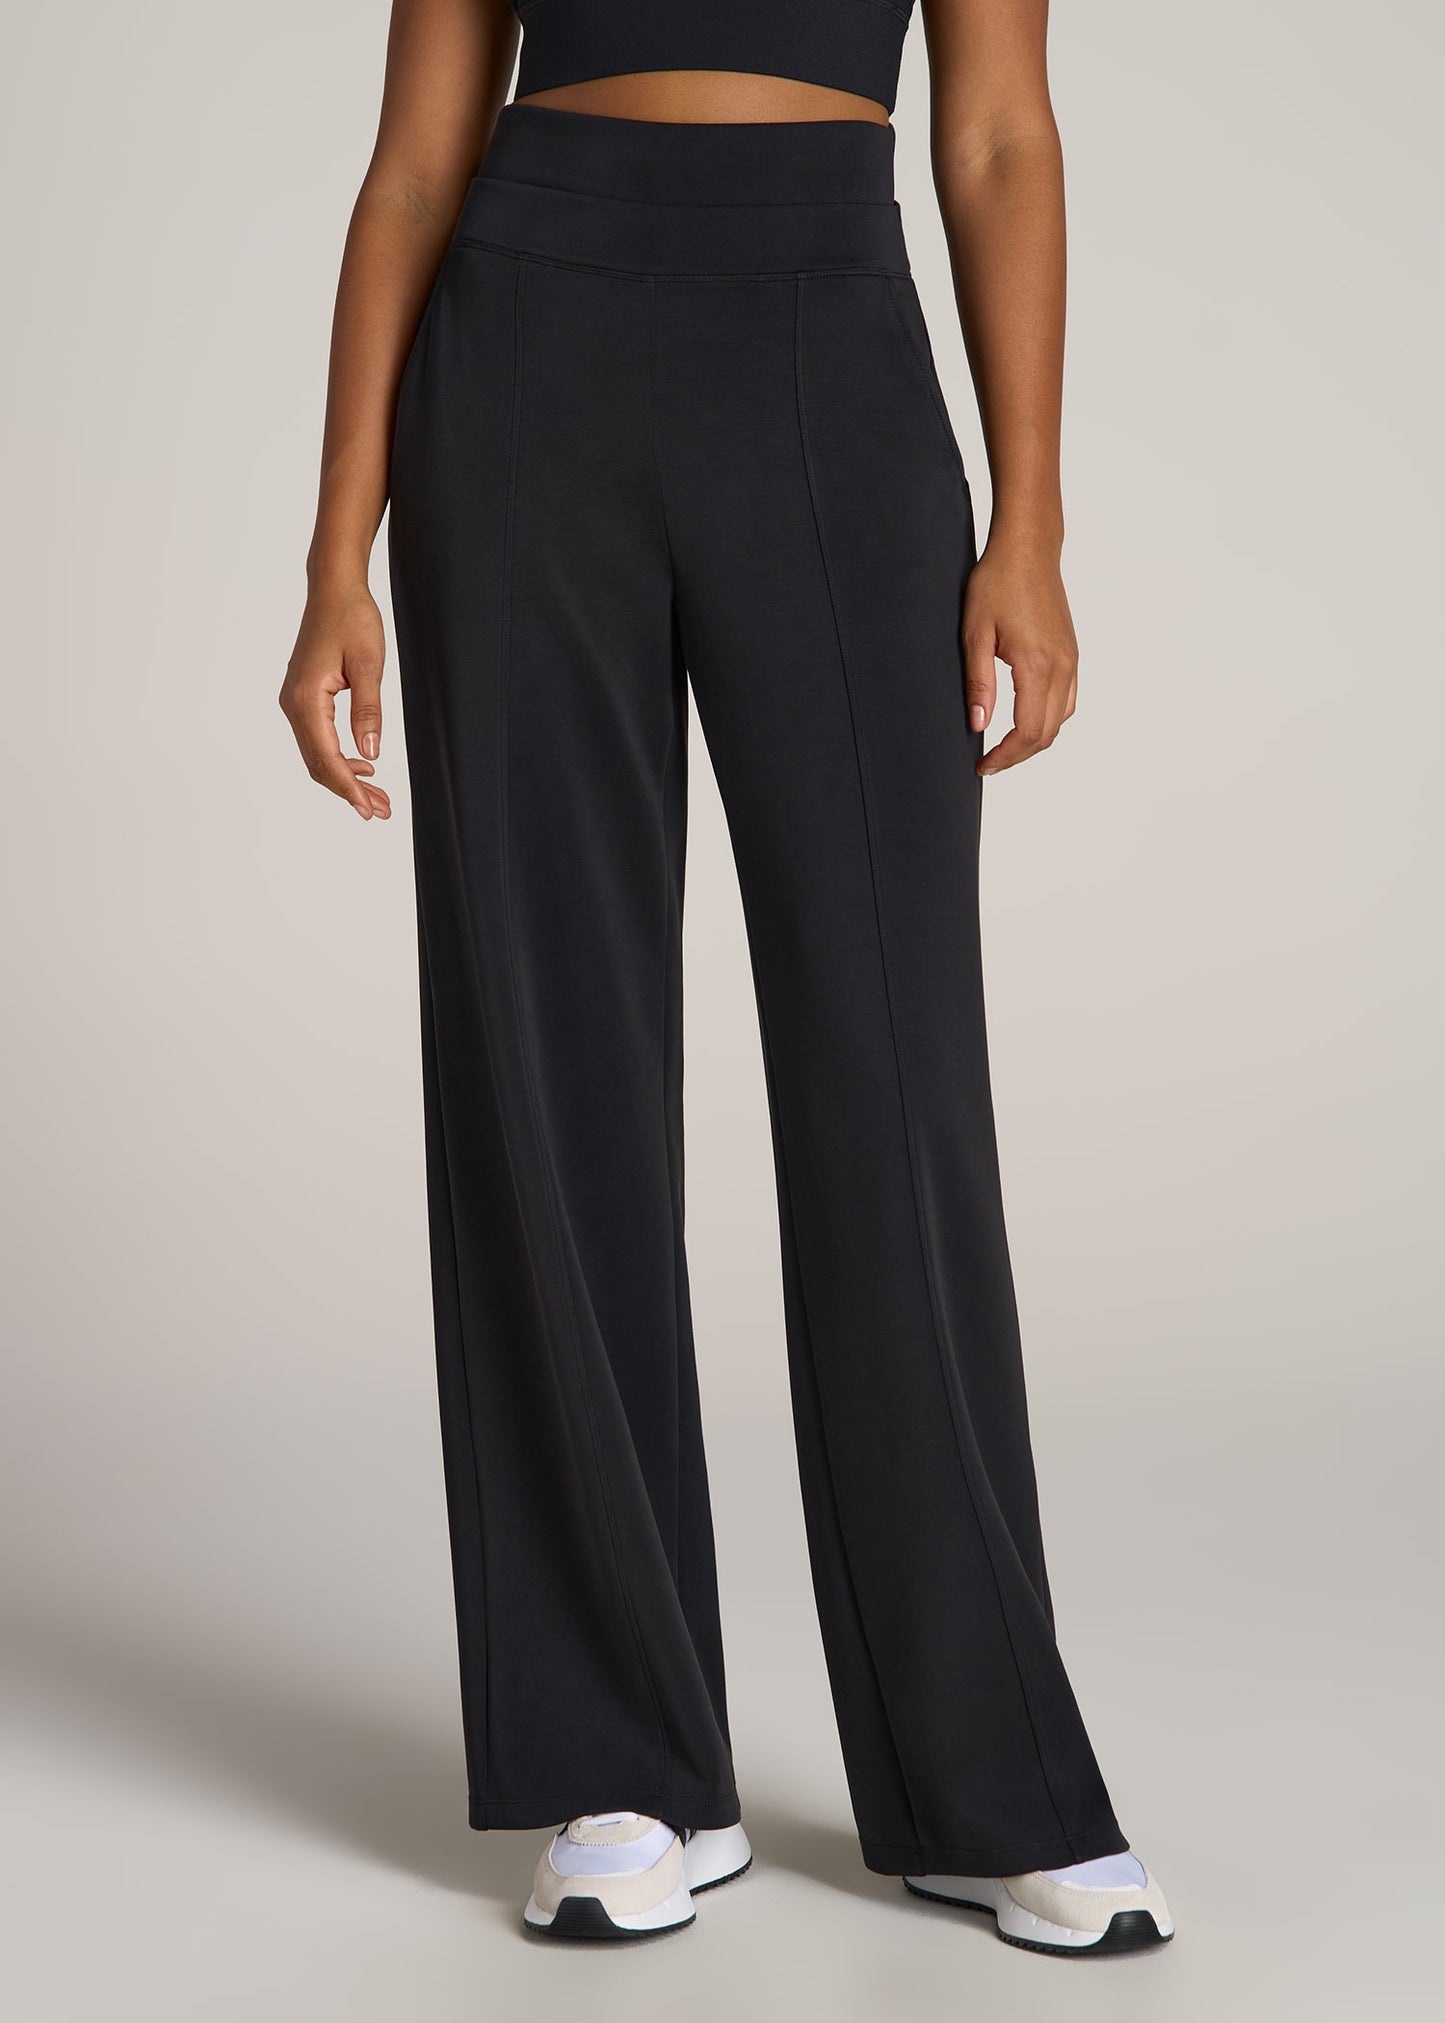 Women's Classic Poly Knit Pants - Pull On Slacks with Elastic